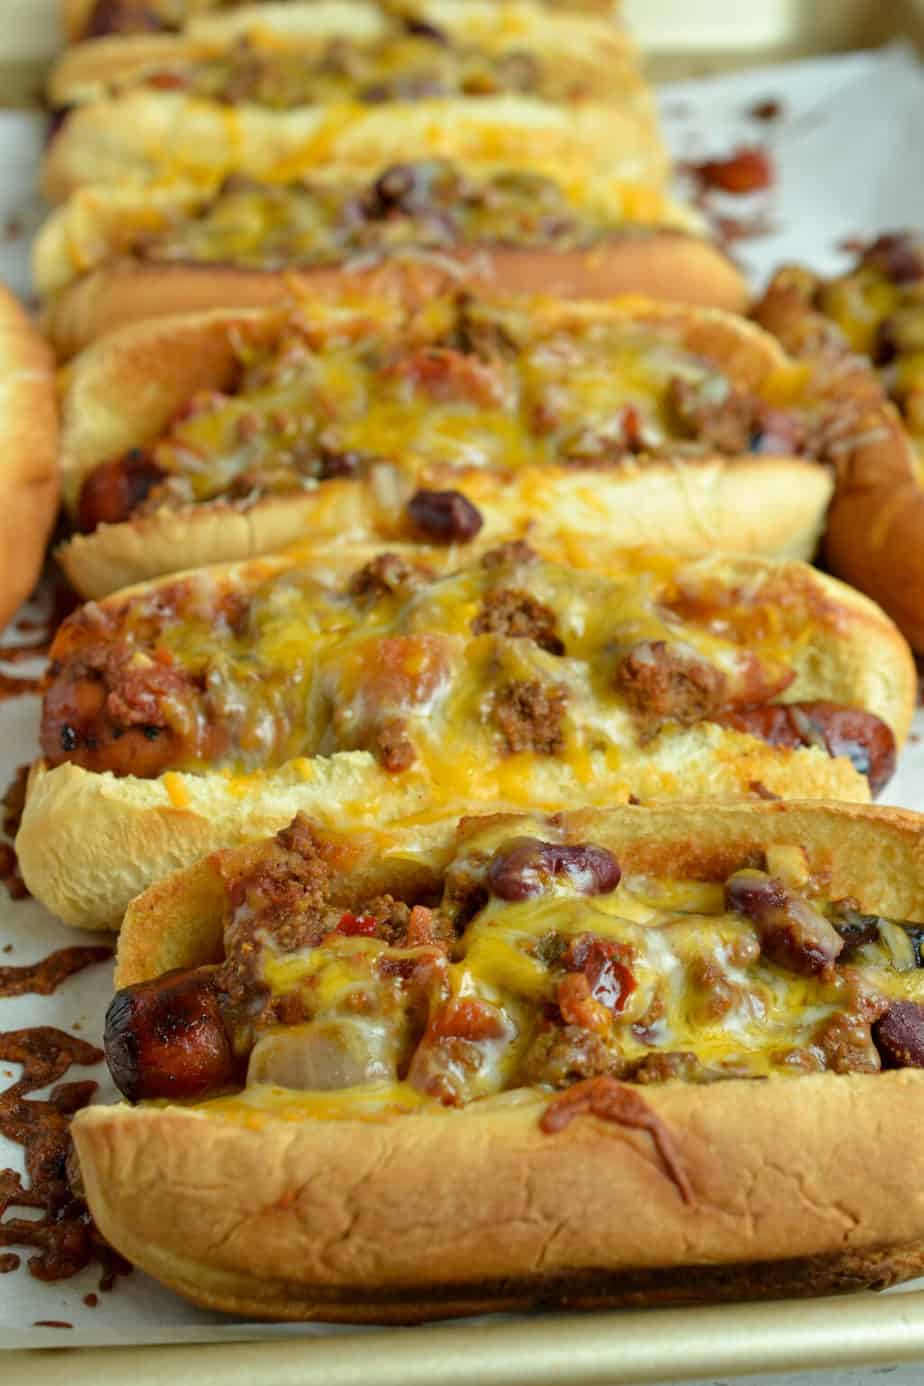 Best Chili Cheese Dogs | Small Town Woman